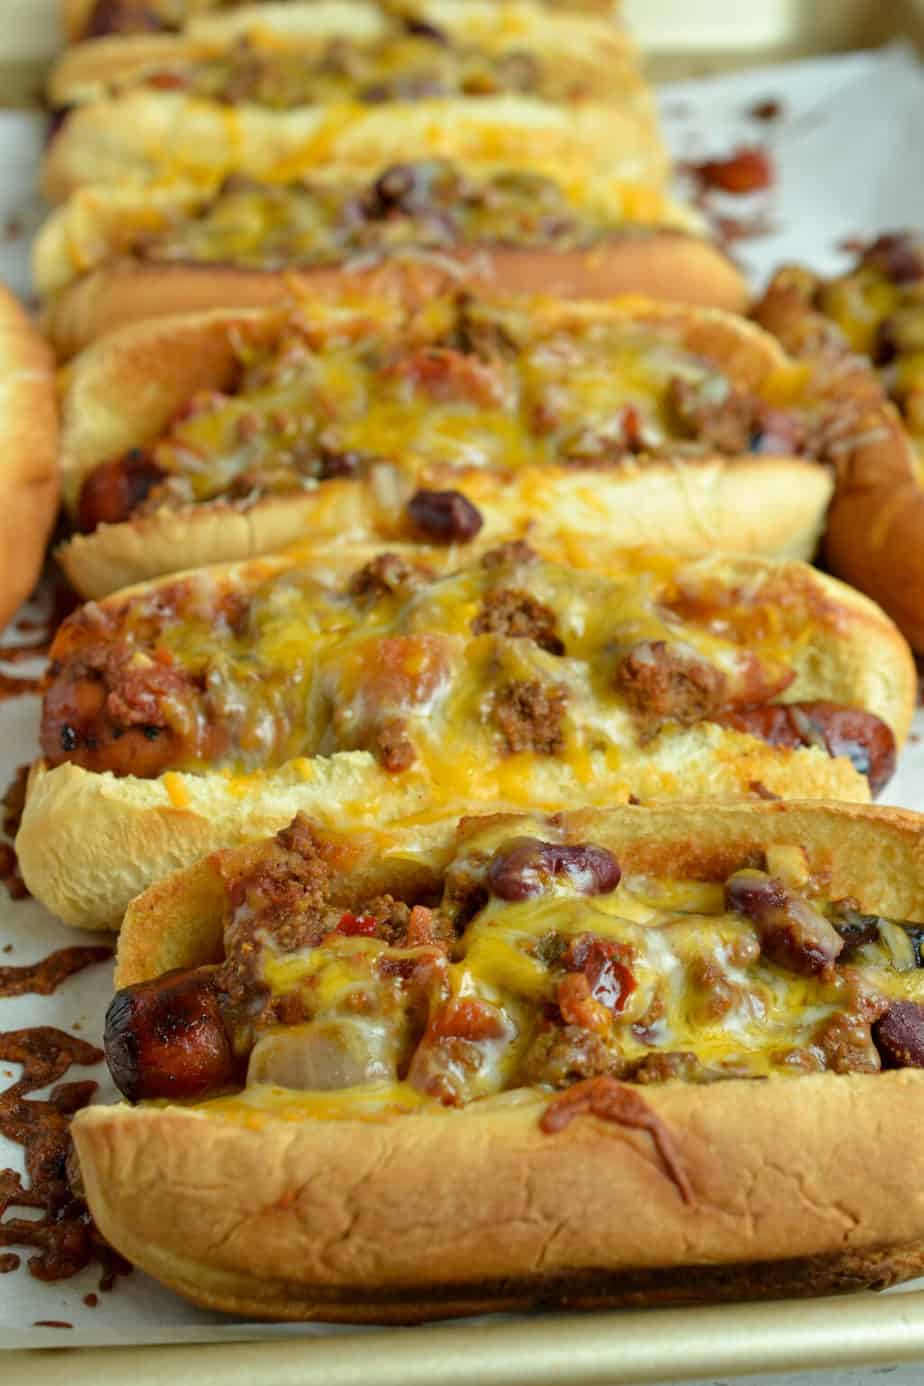 Best Chili Cheese Dogs | Small Town Woman